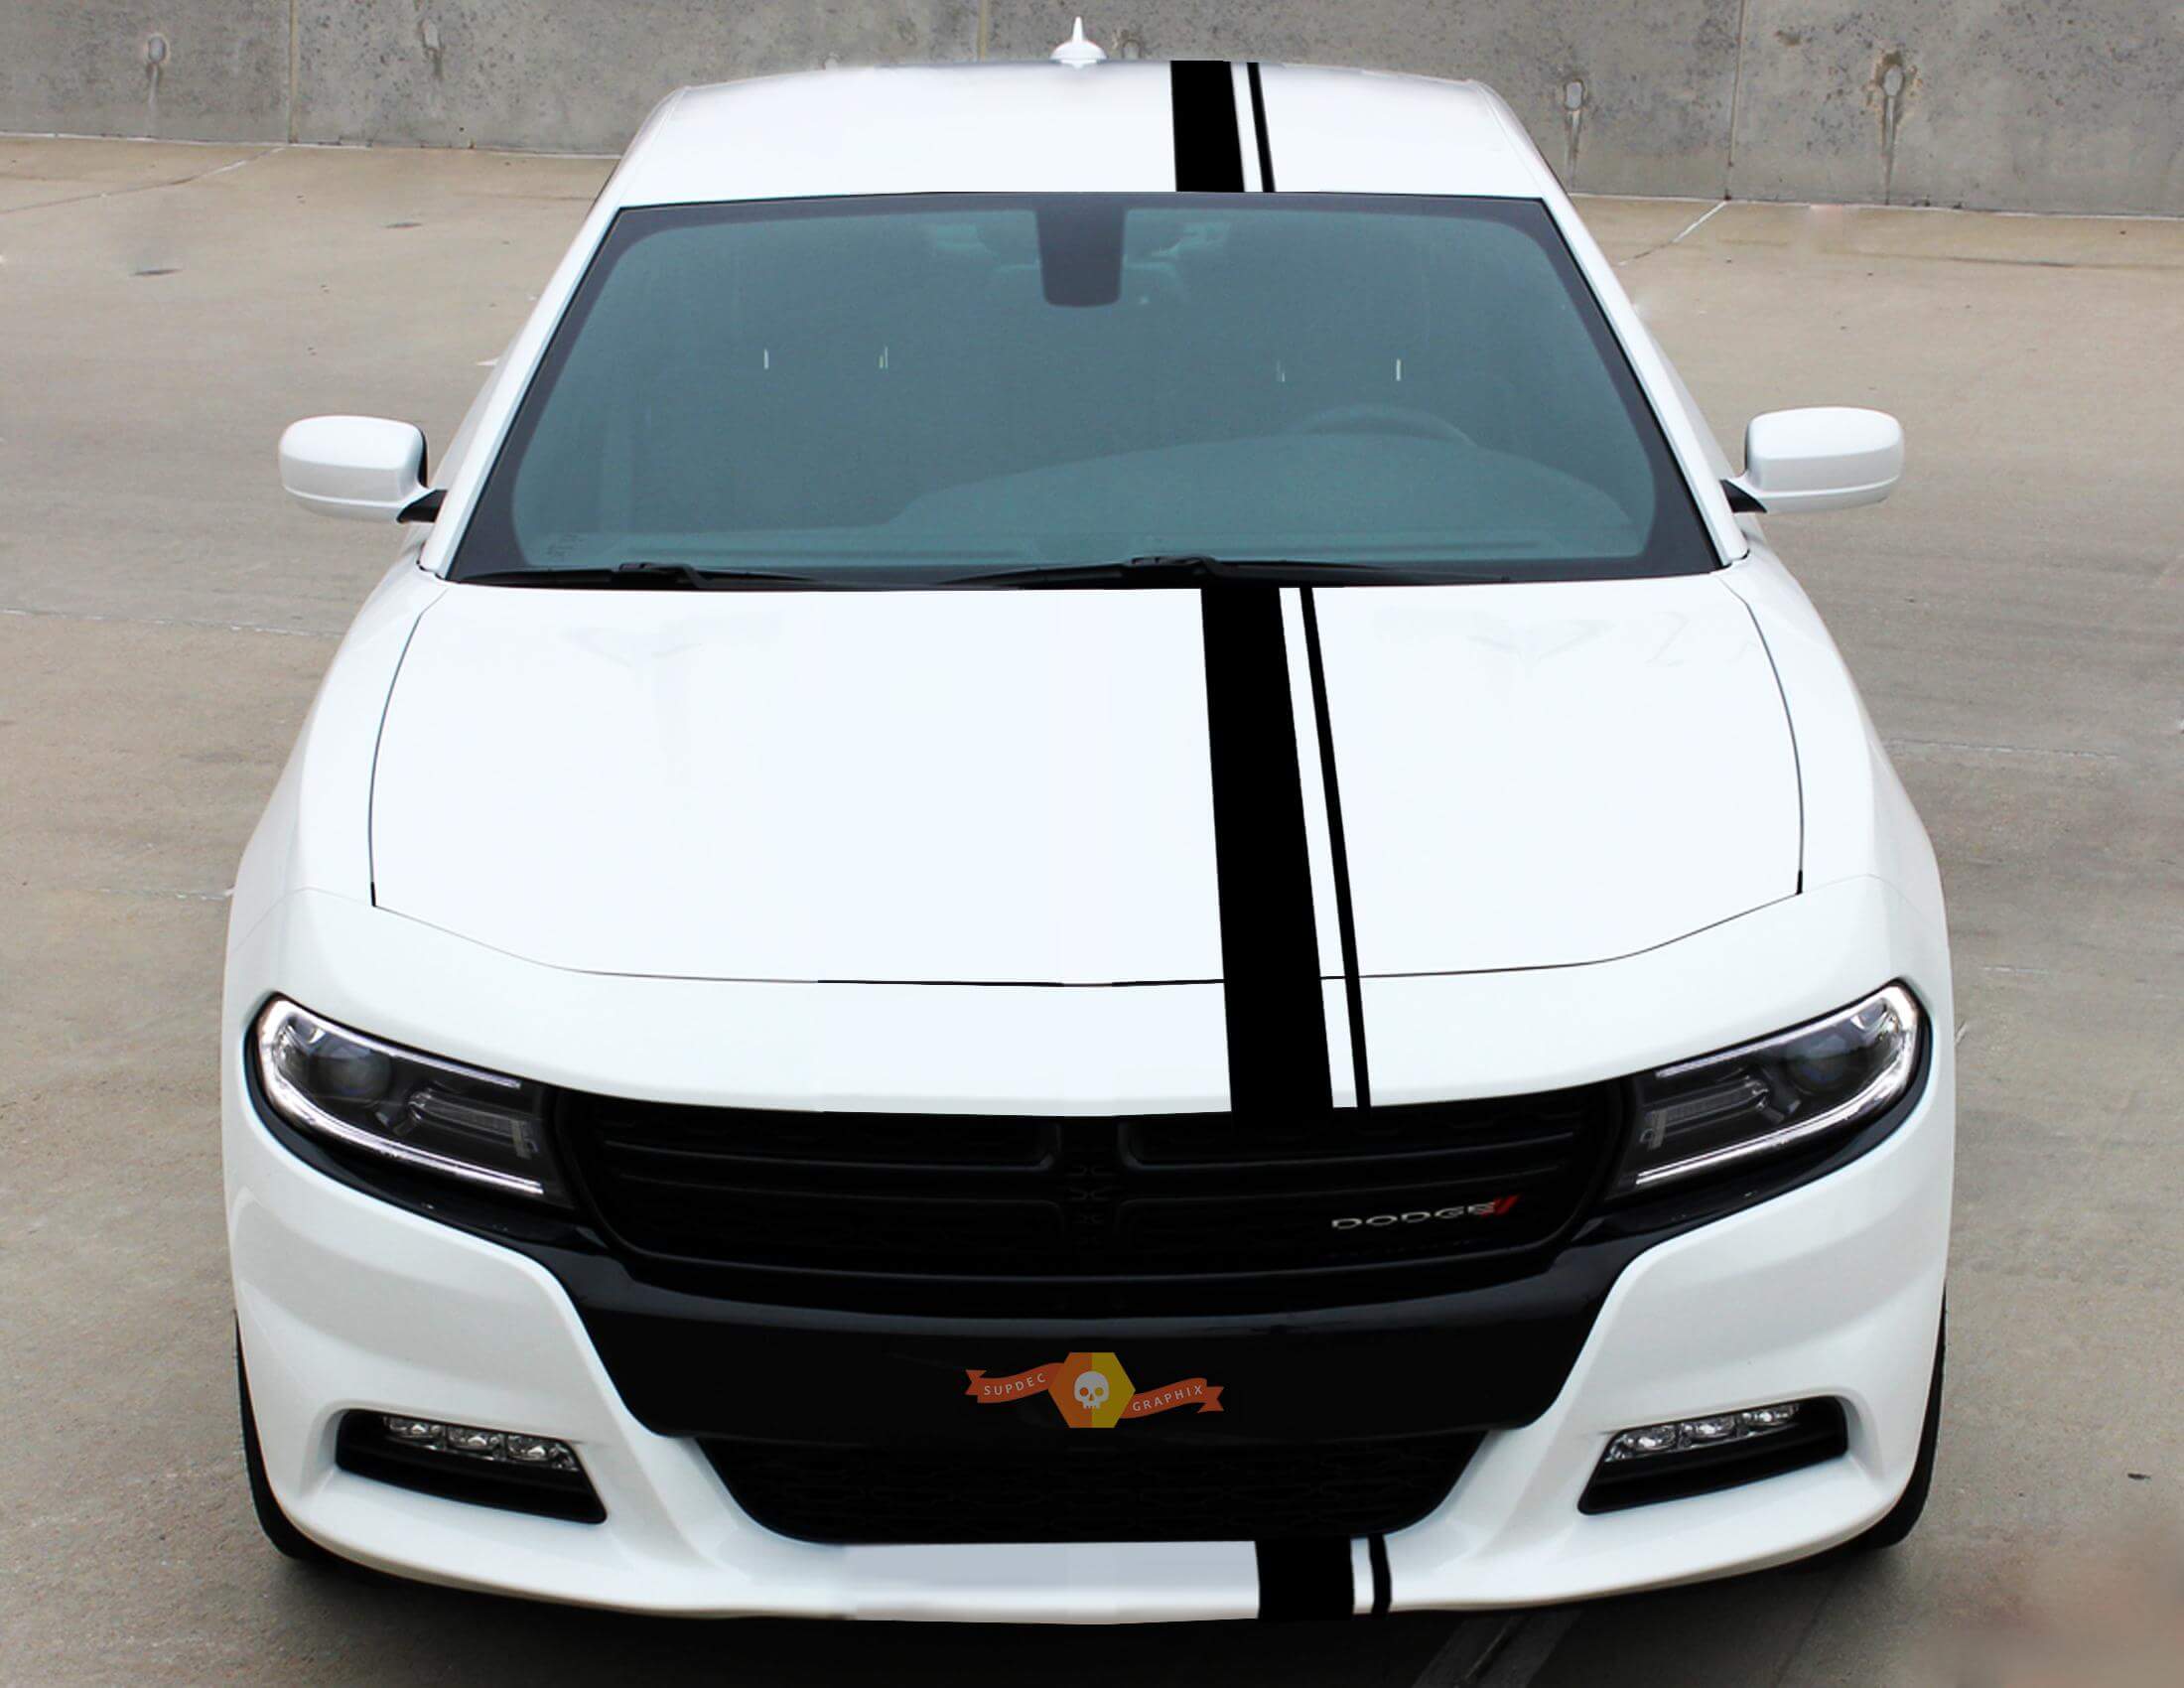 2015-2017 Charger E-Rally Graphic Kit